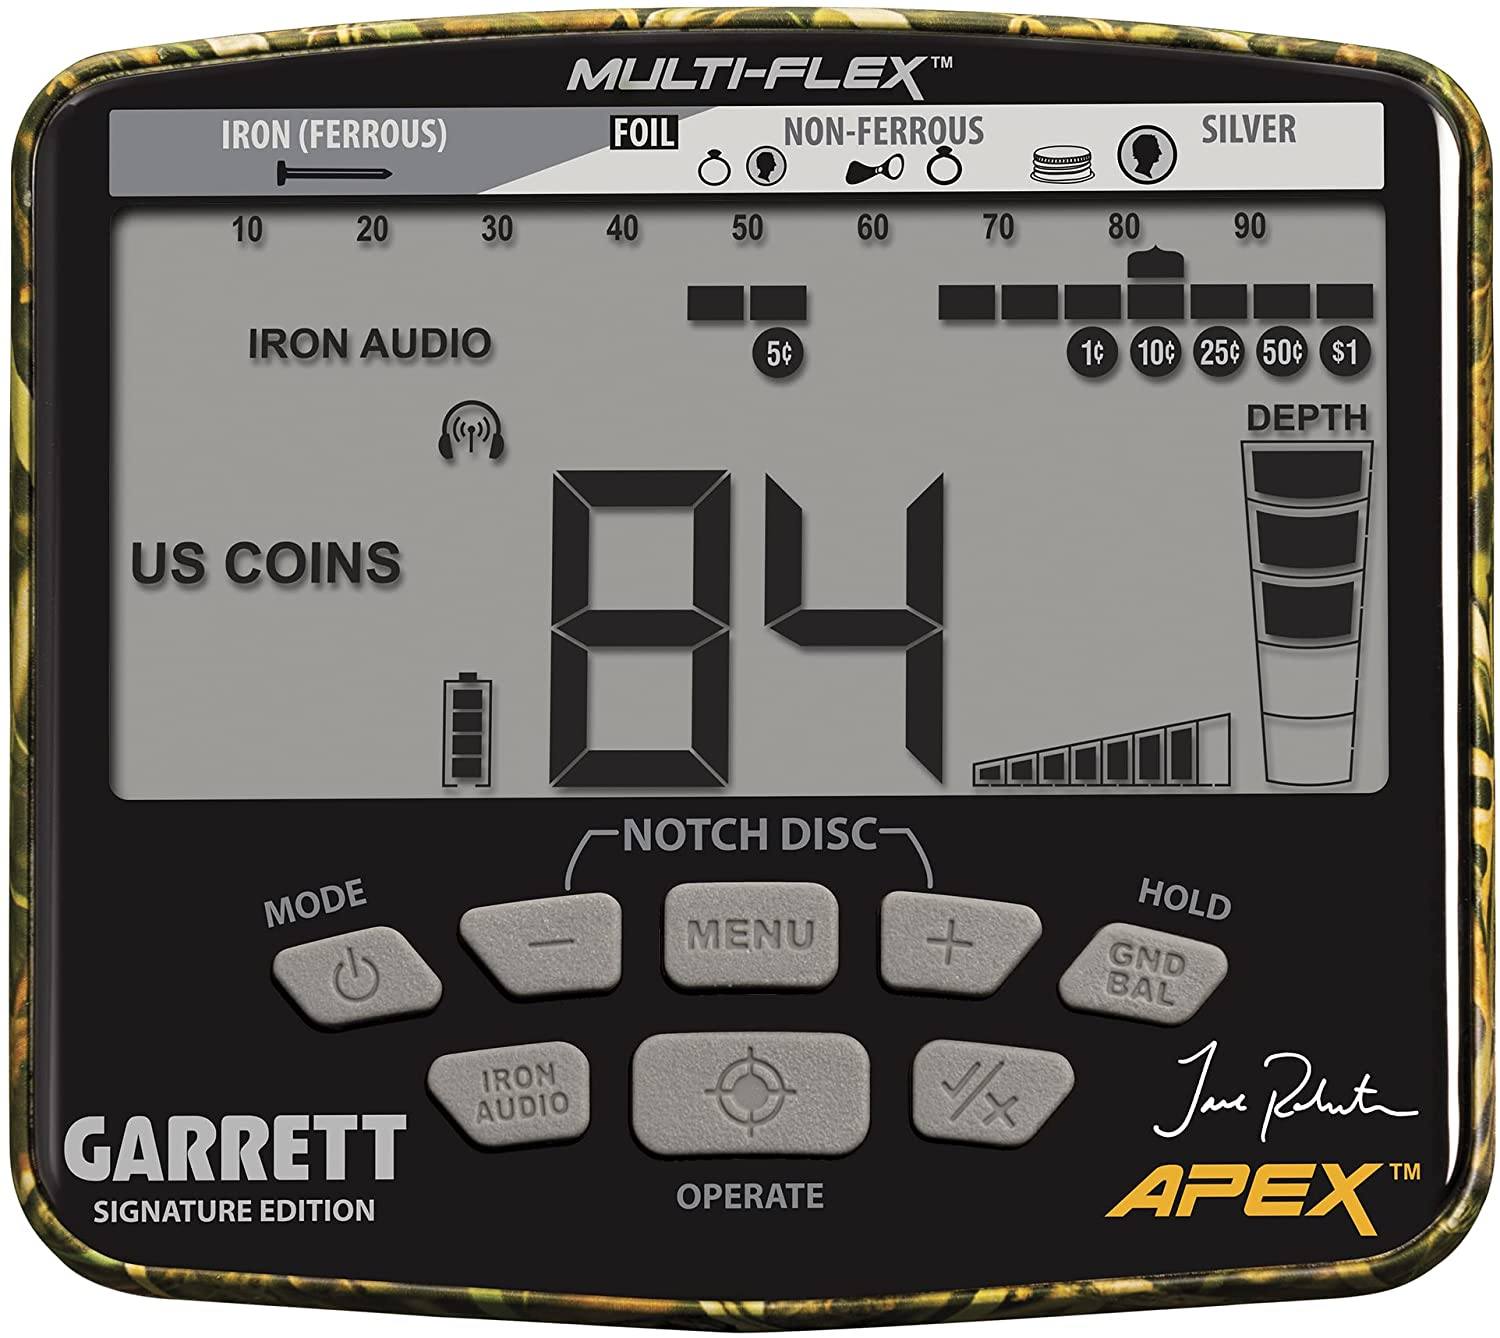 Garrett Jase Robertson Signature Edition APEX Metal Detector with Z-Lynk and Headphones, Accessories